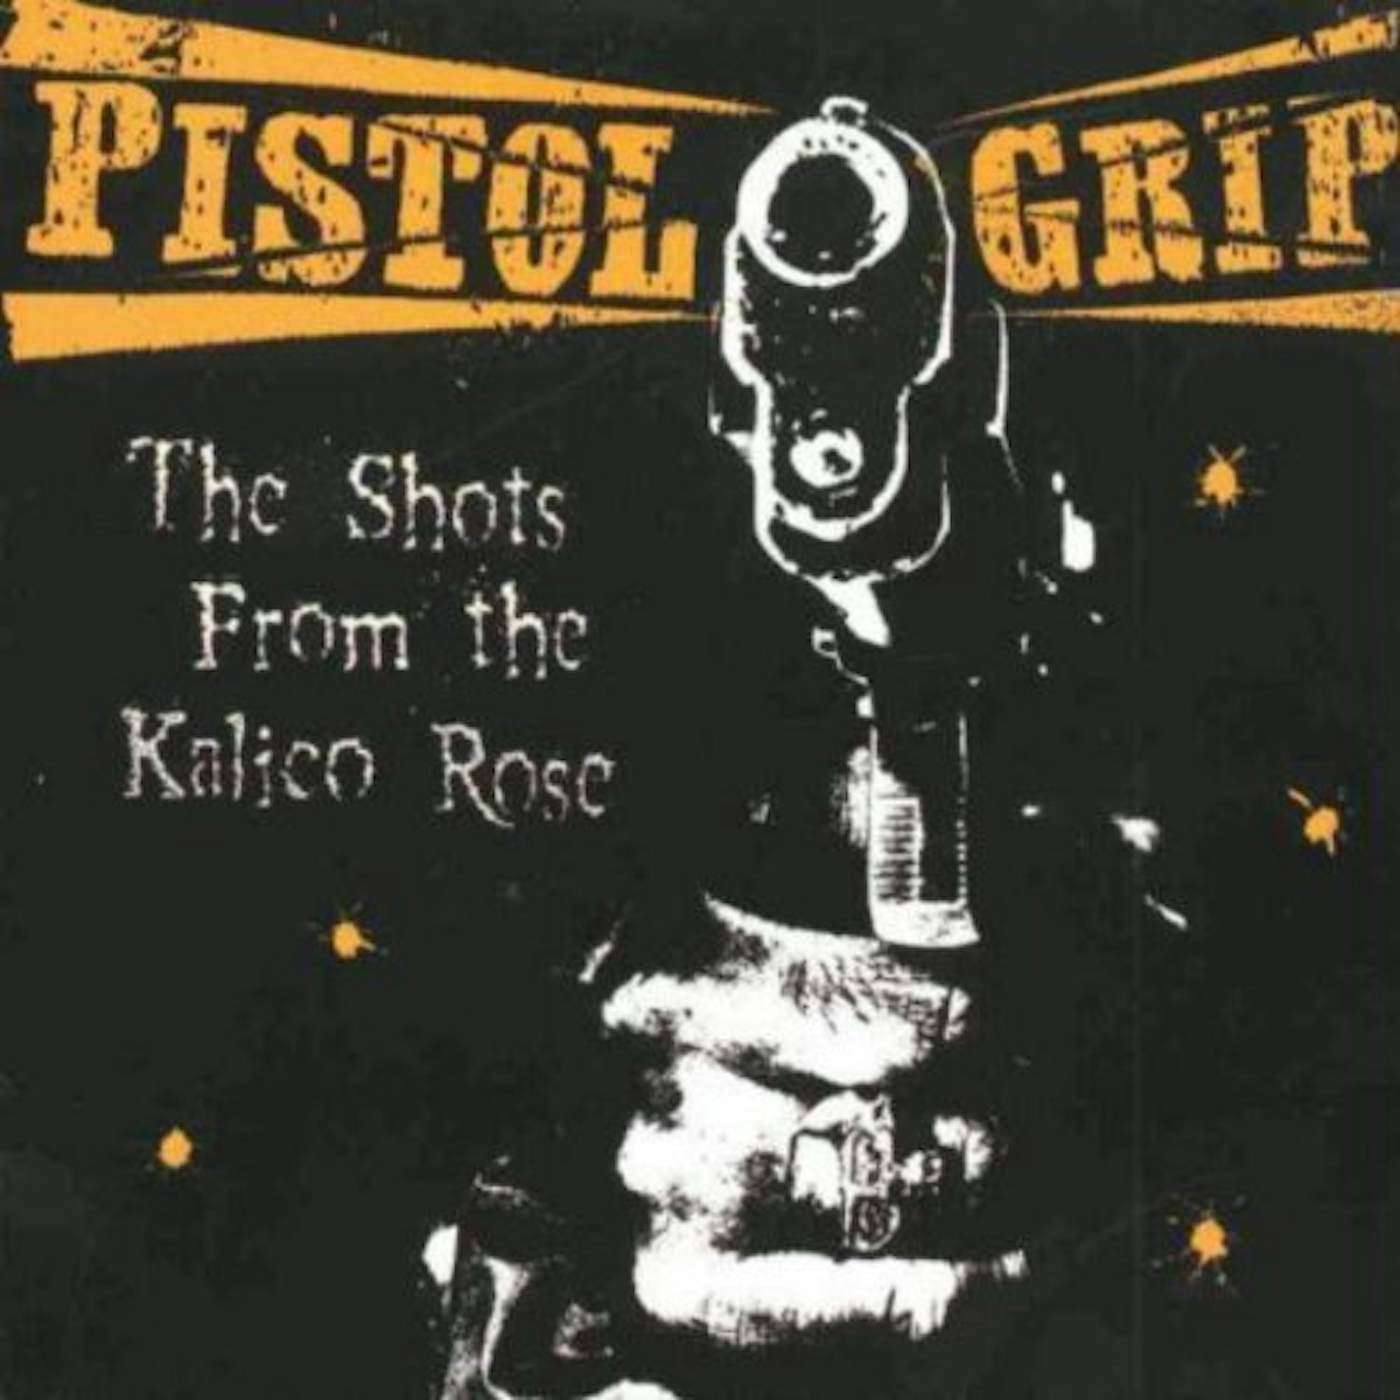 Pistol Grip SHOTS FROM THE KALICO ROSE CD